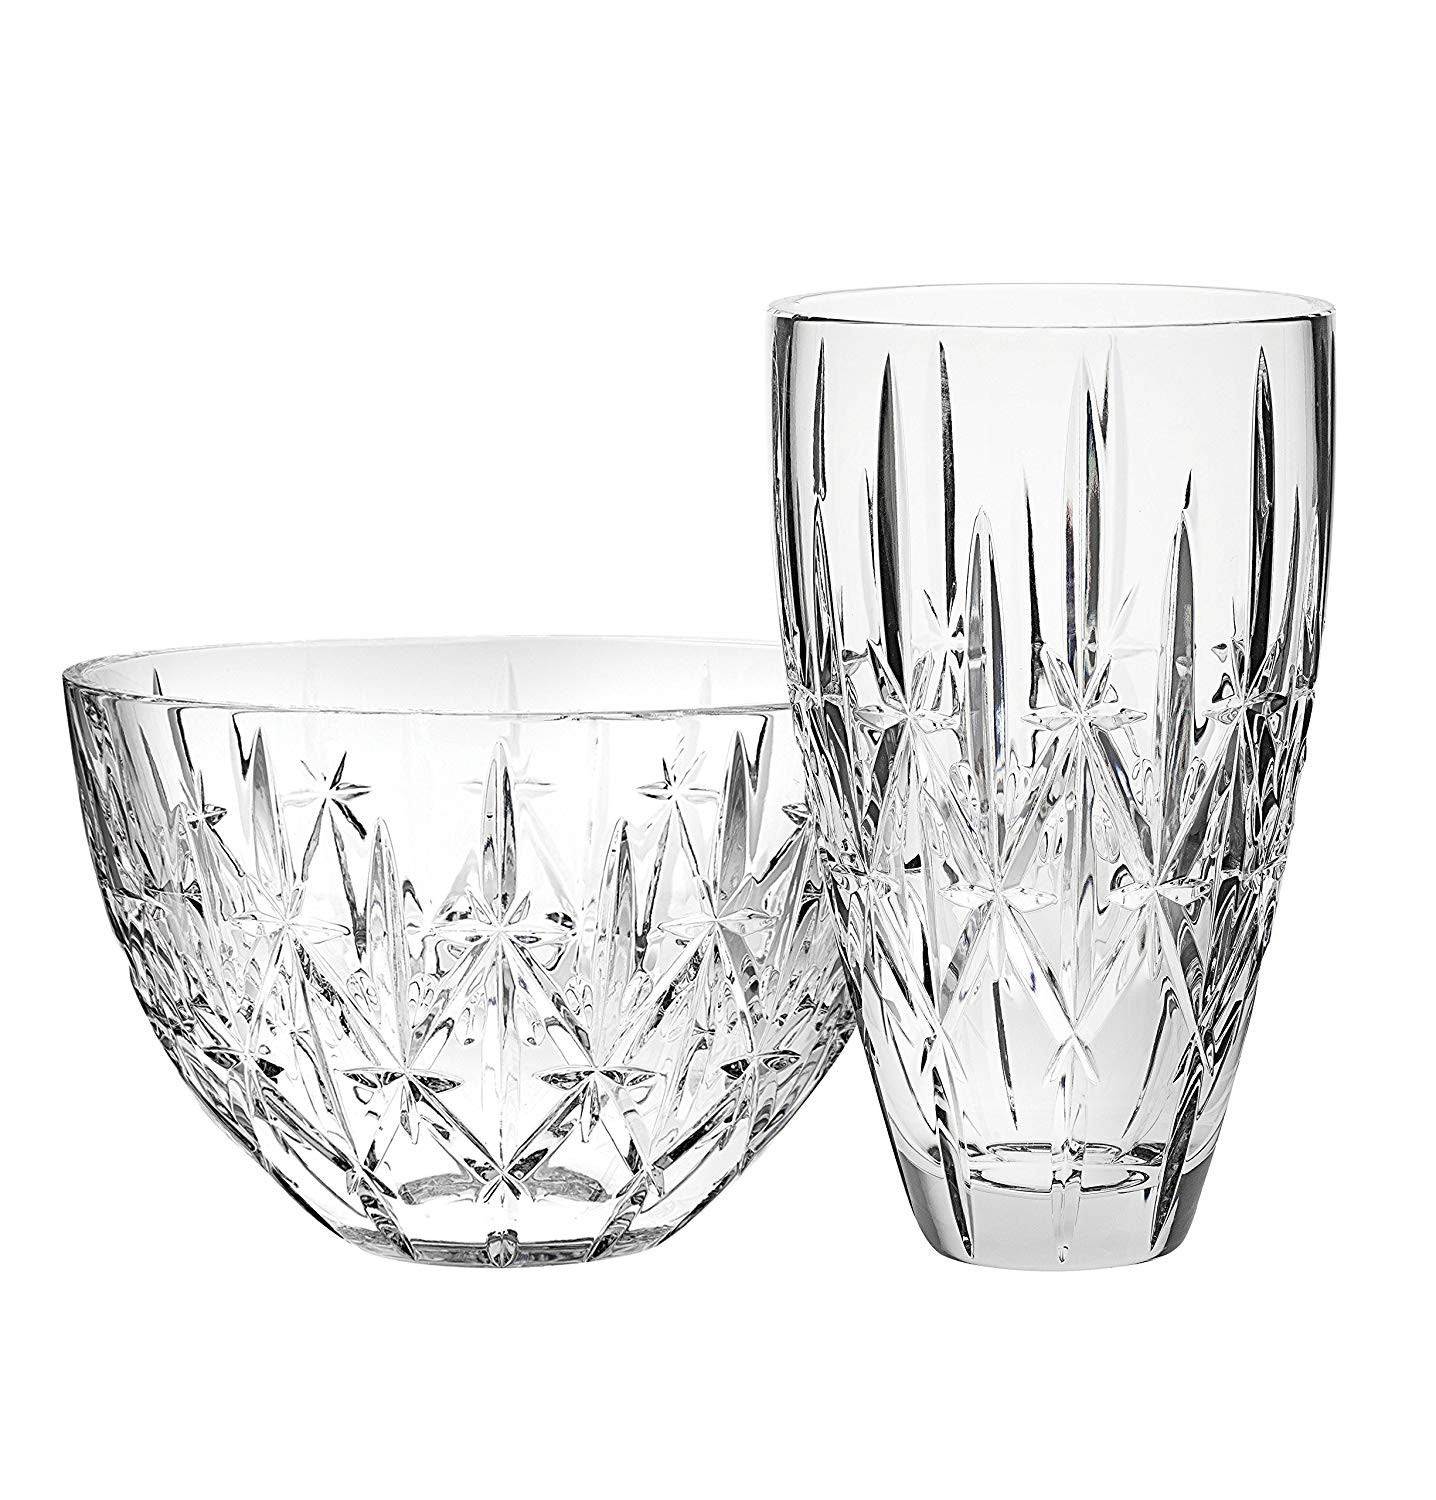 13 Lovable Waterford Marquis Markham Vase 2024 free download waterford marquis markham vase of amazon com marquis by waterford sparkle bowl 9 home kitchen with 91ze4xzhccl sl1500